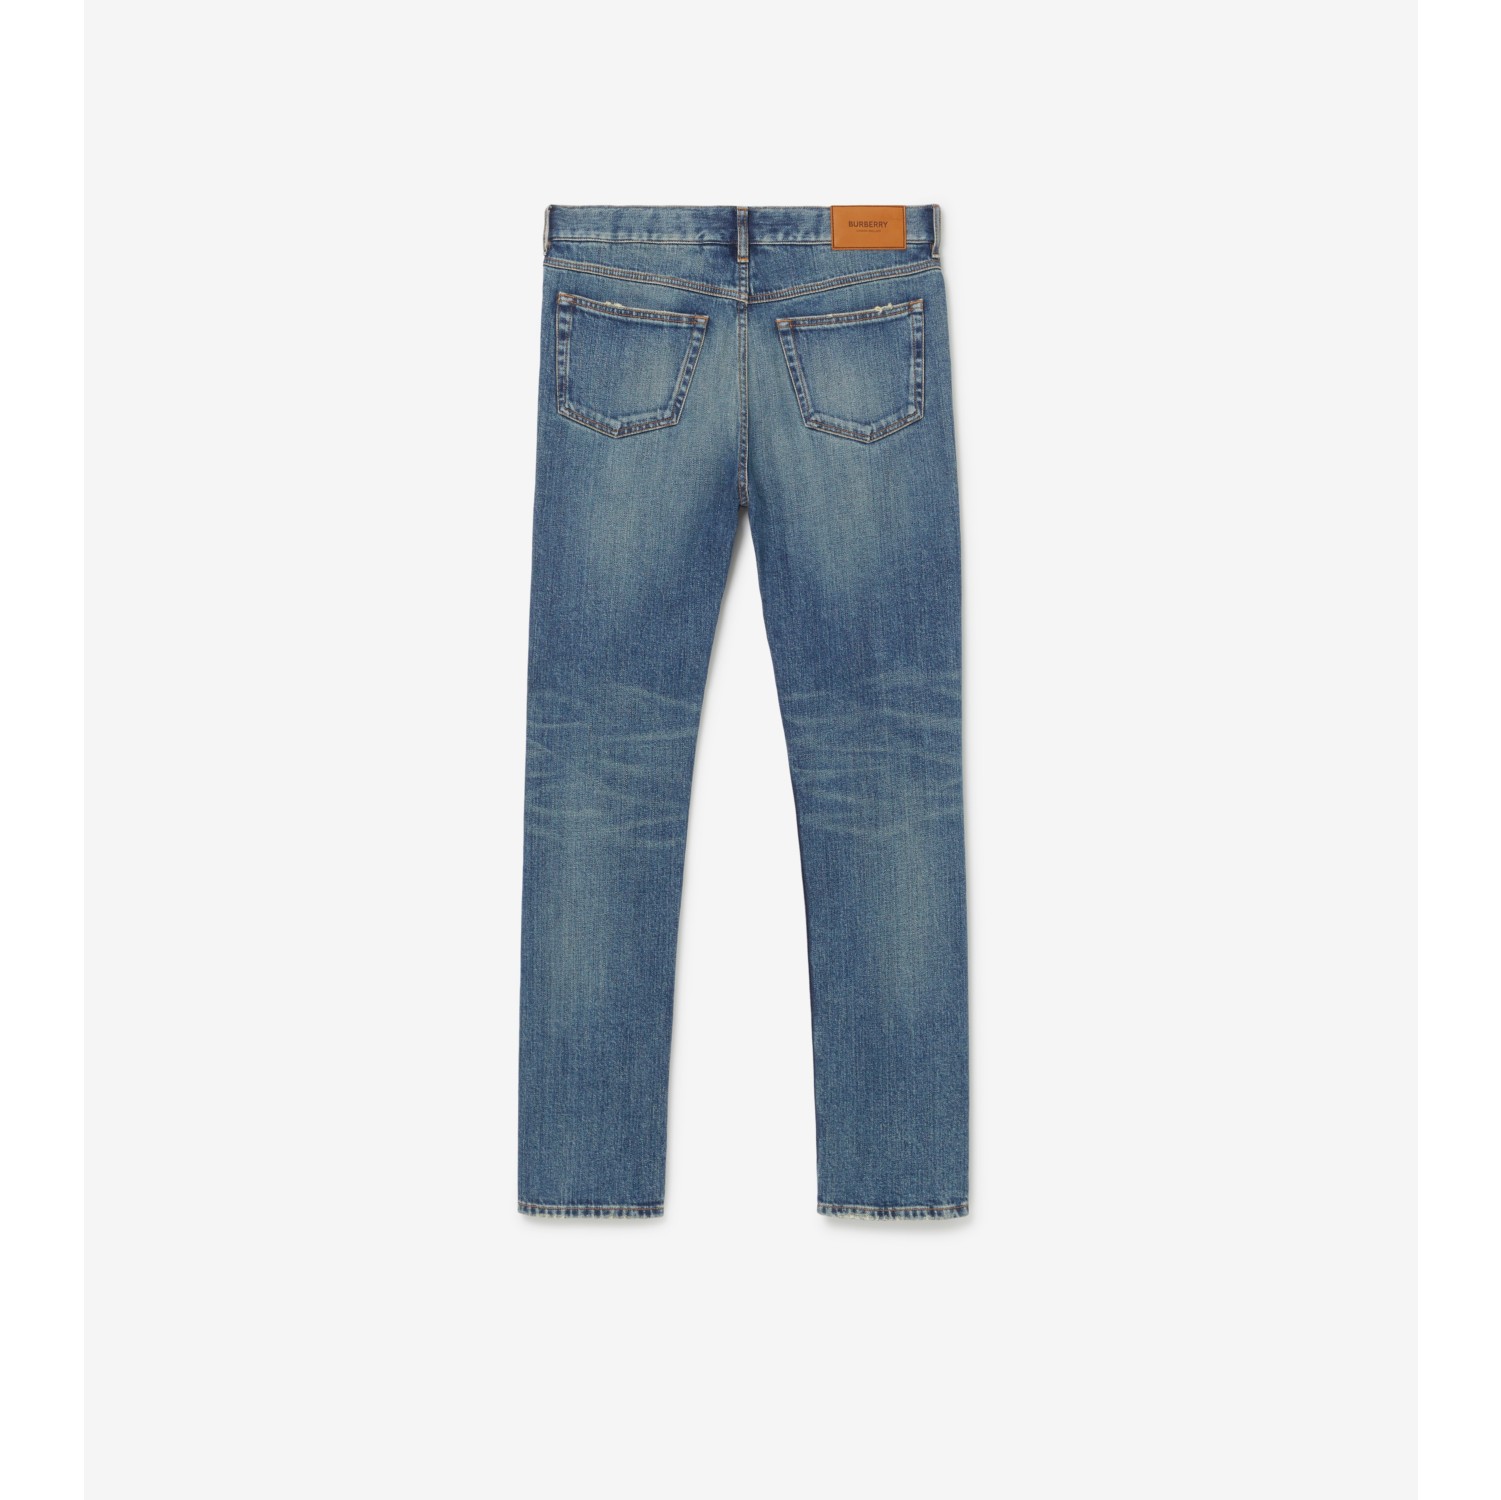 Customized Jeans Patch Supplier Help Make Your Denims And Jeans Unique